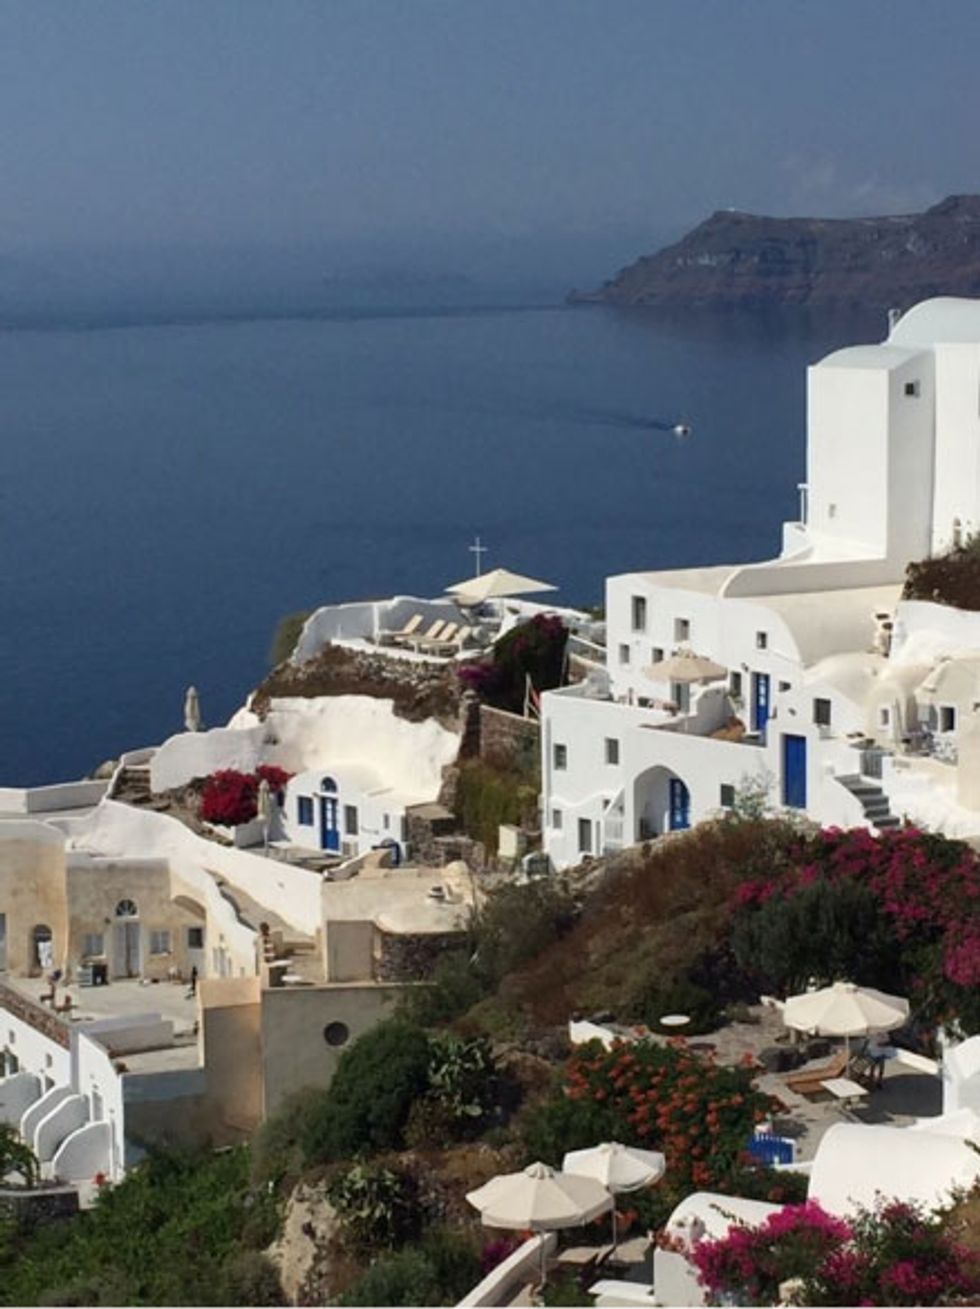 Santorini offers picture-perfect views.